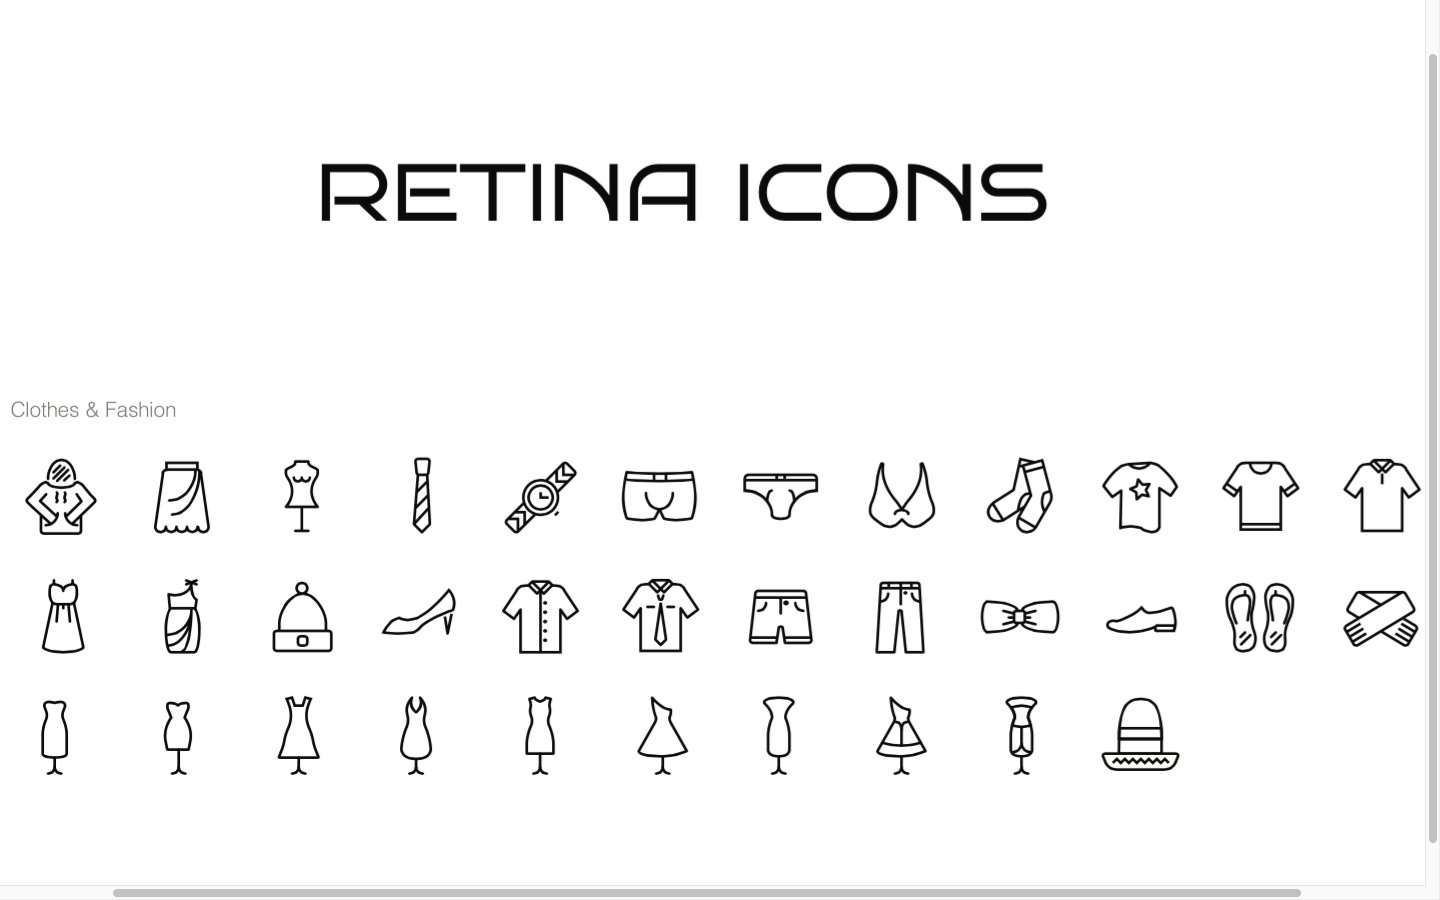 34 Clothing Icons for iOS cover image.